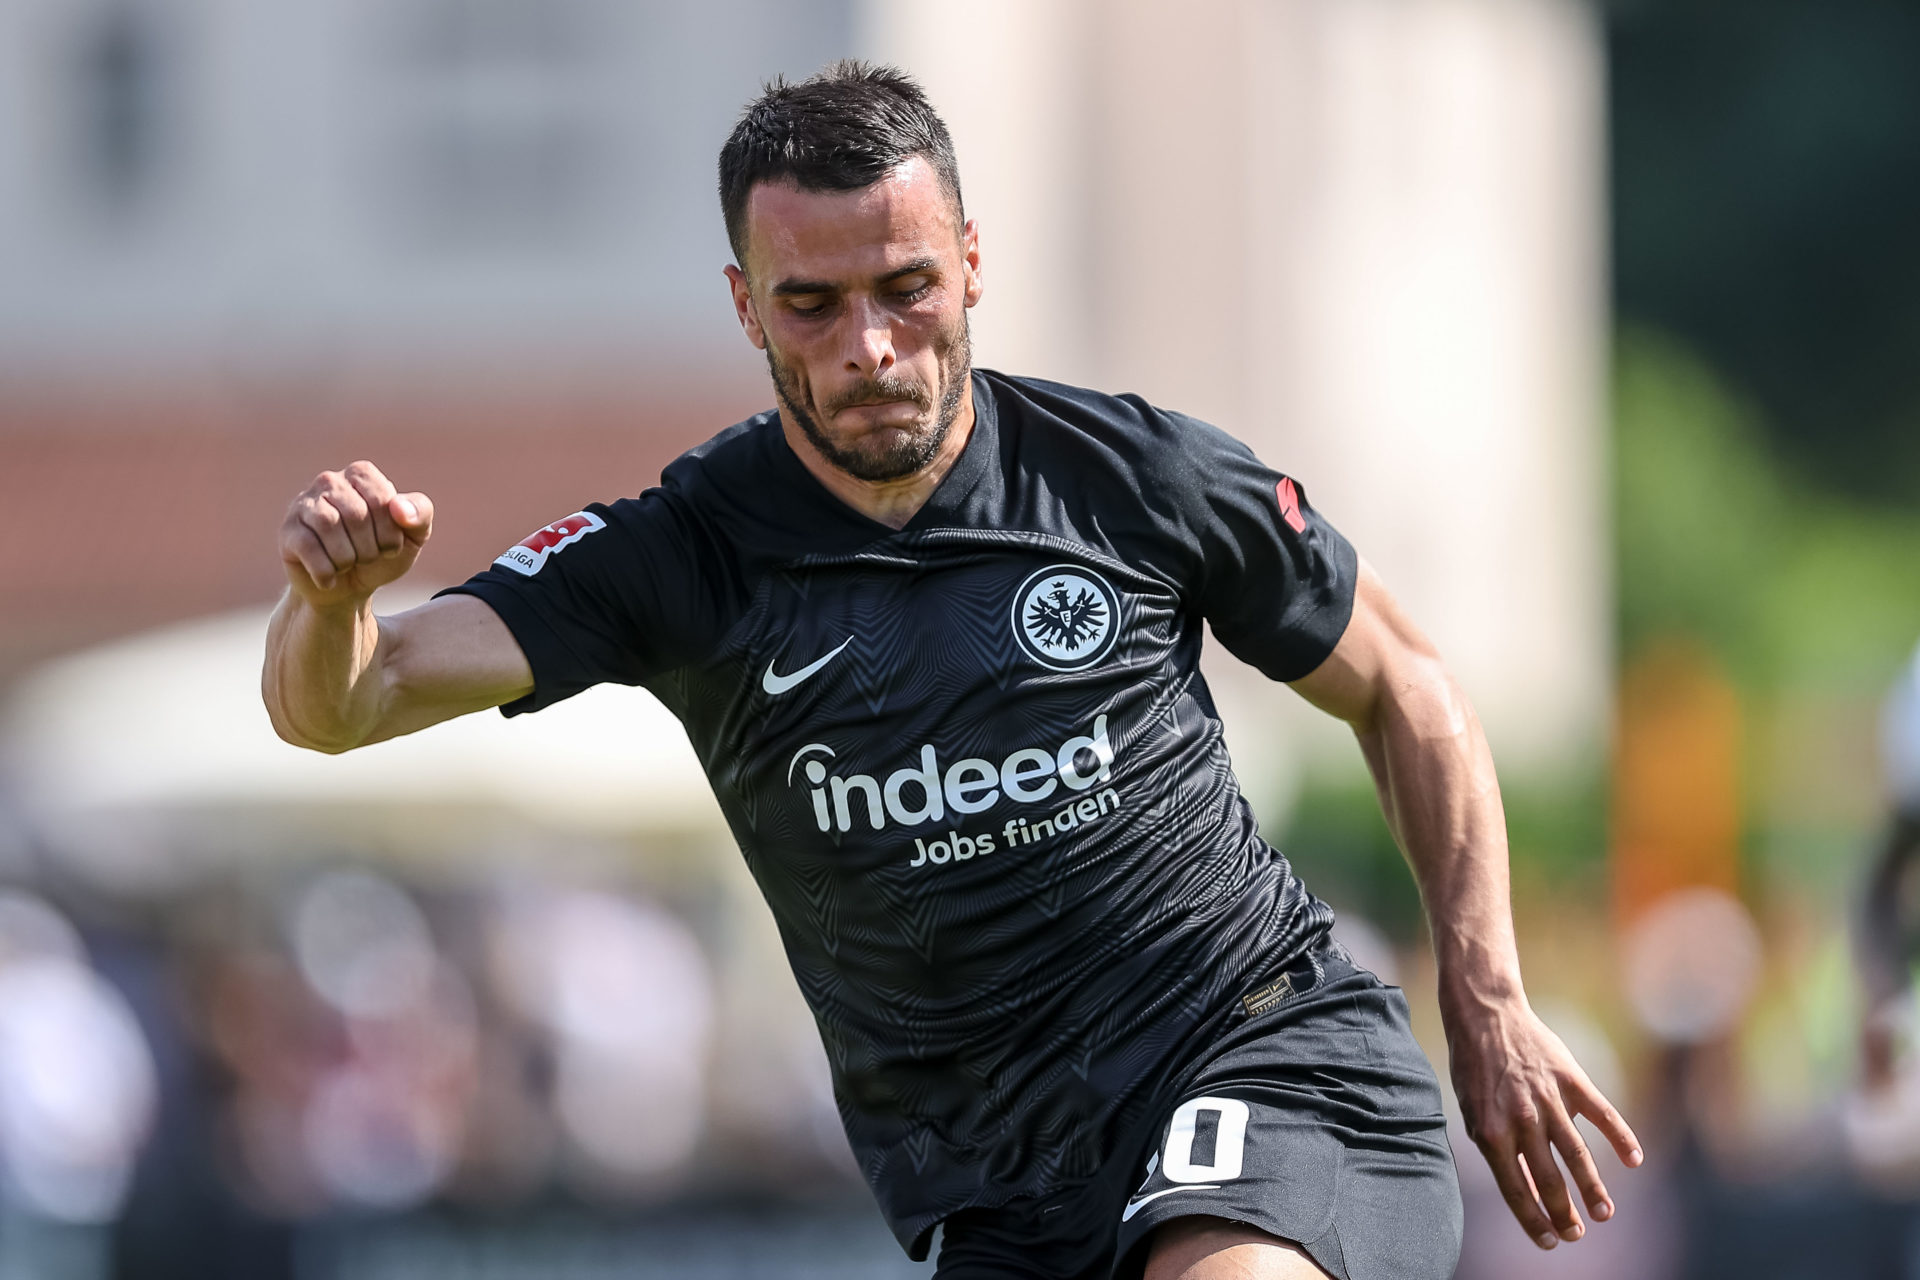 West Ham United could be on the verge of securing a real bargain for Filip Kostic